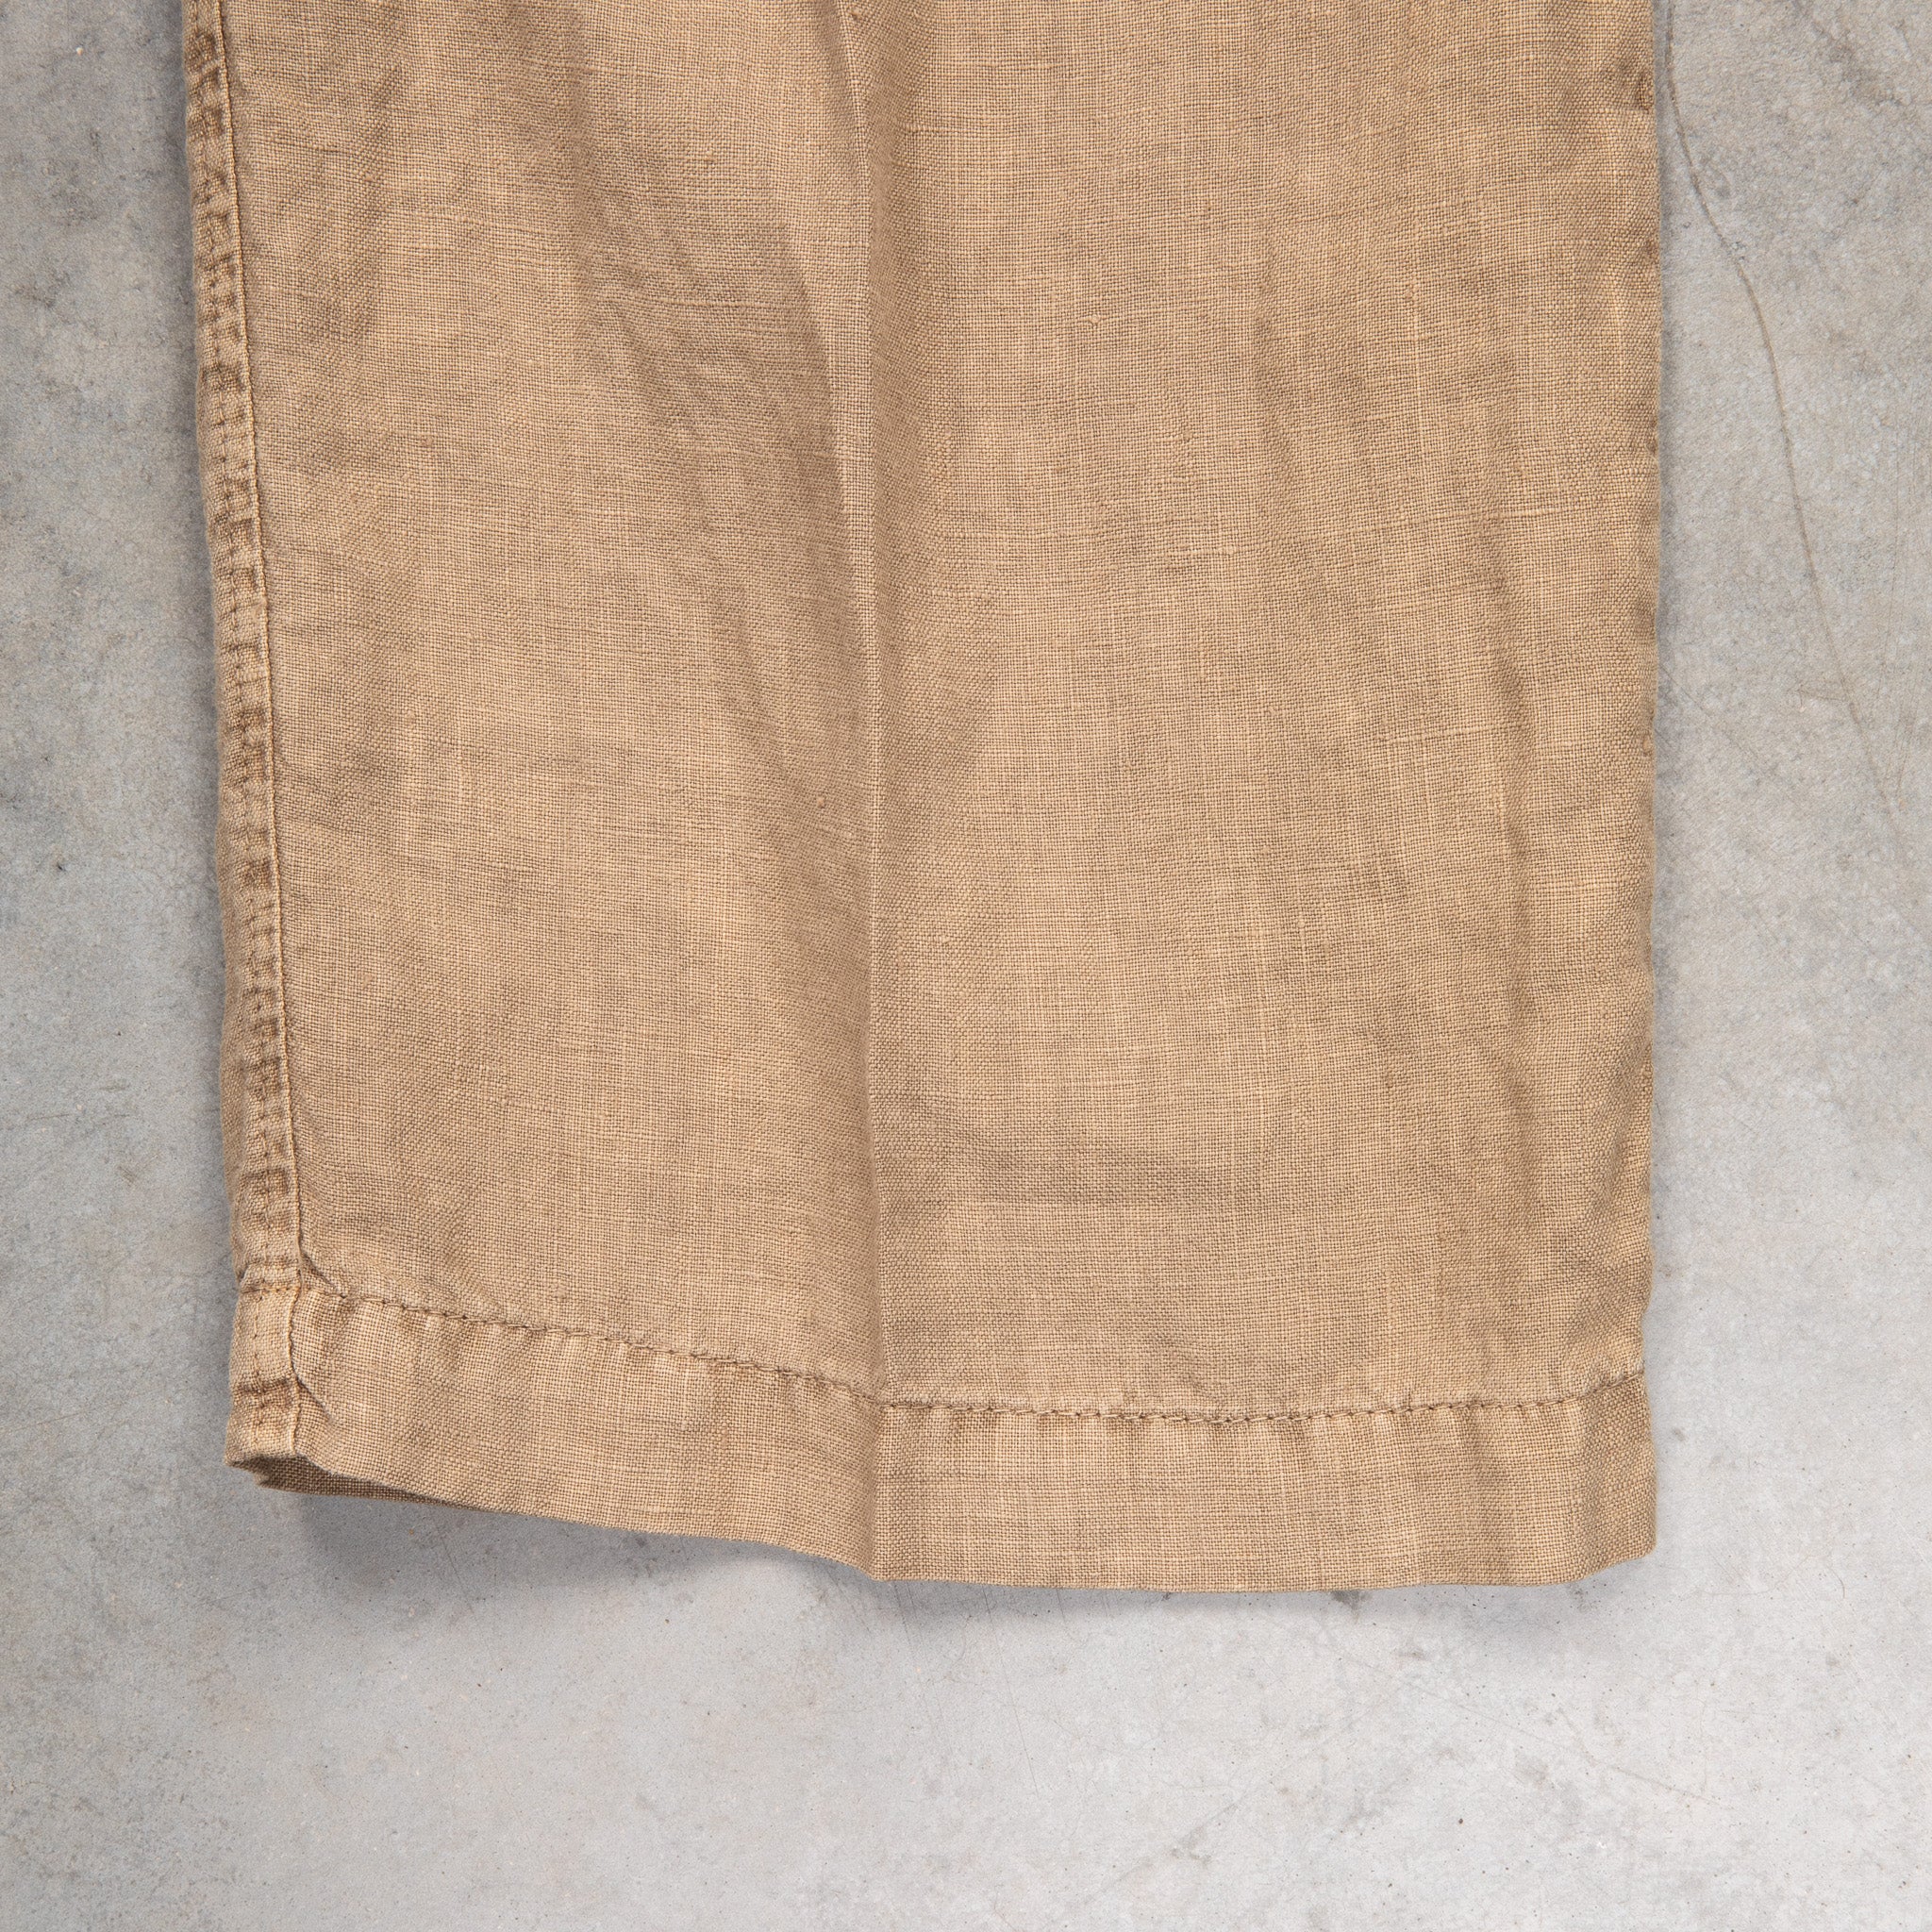 James perse Relaxed Linen Pant Cashew